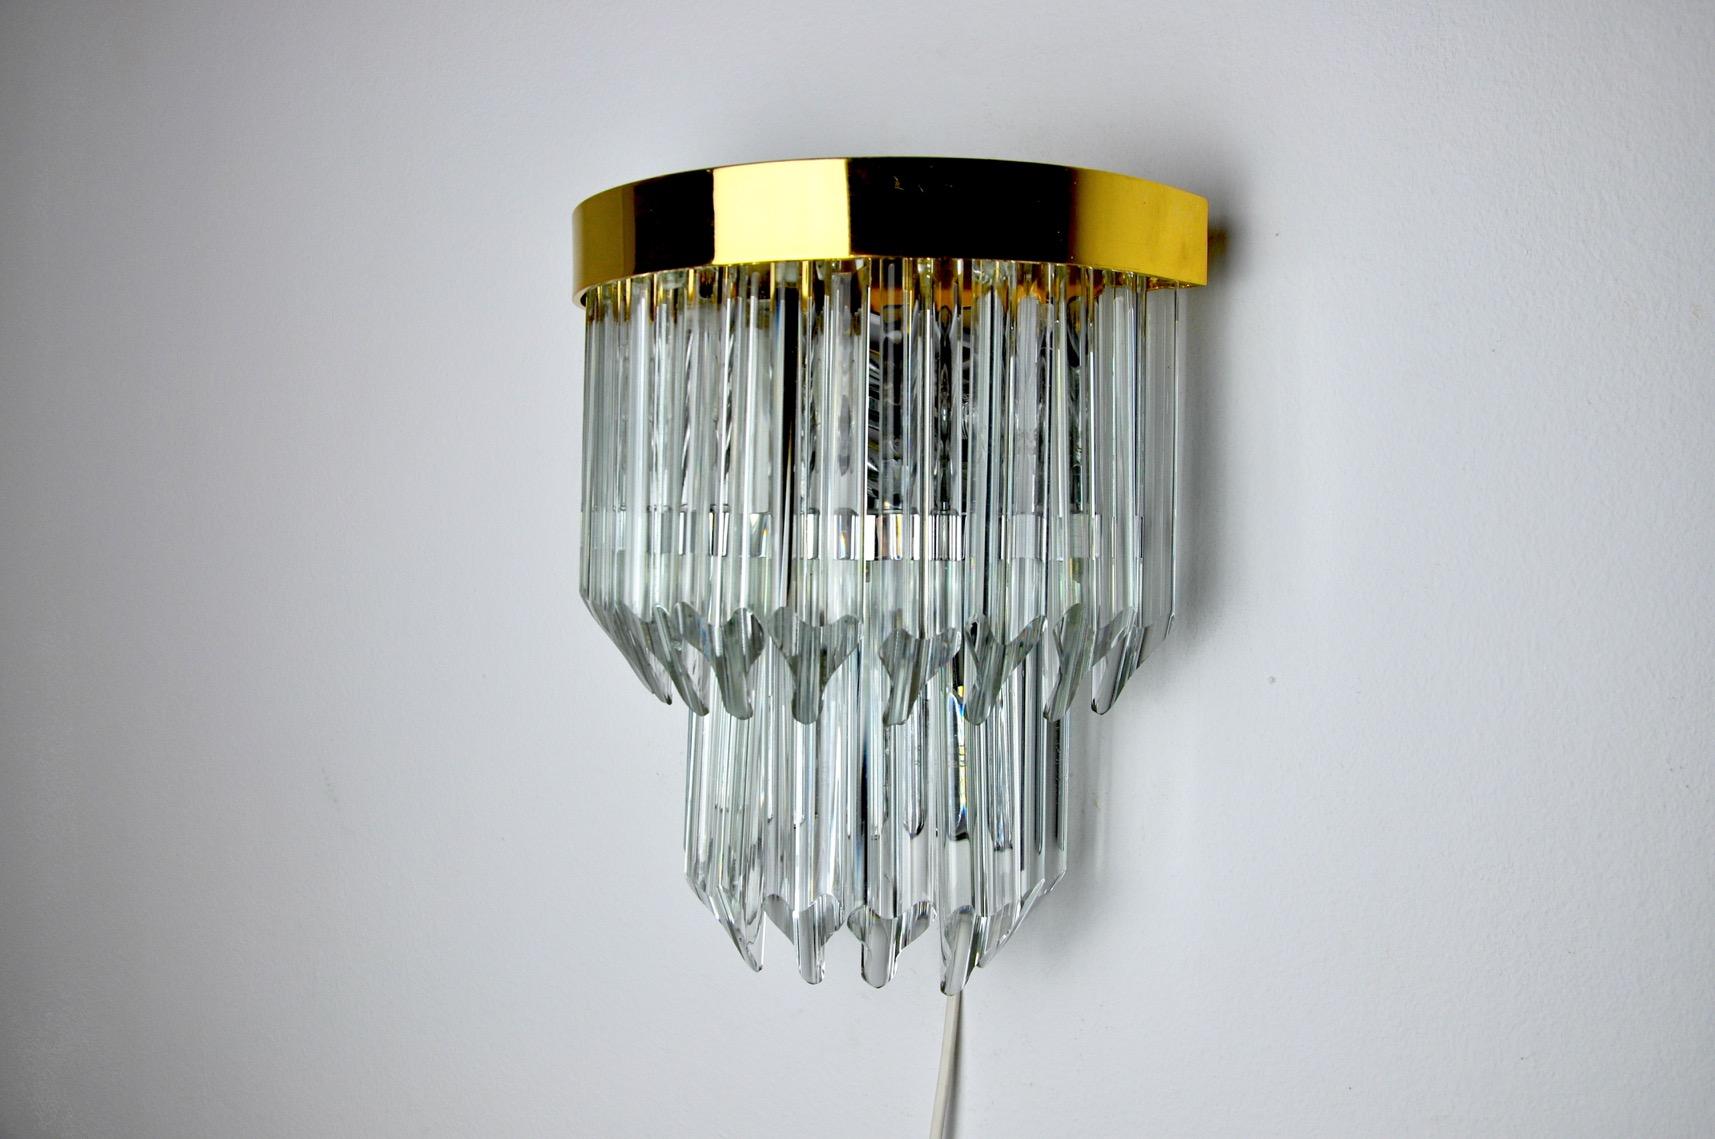 Very nice and big wall lamp Triedi Murano dating from the 70s. Murano glass and gold metal structure. Unique object that will illuminate and bring a real design touch to your interior. Electricity verified, mark of time relative to the age of the